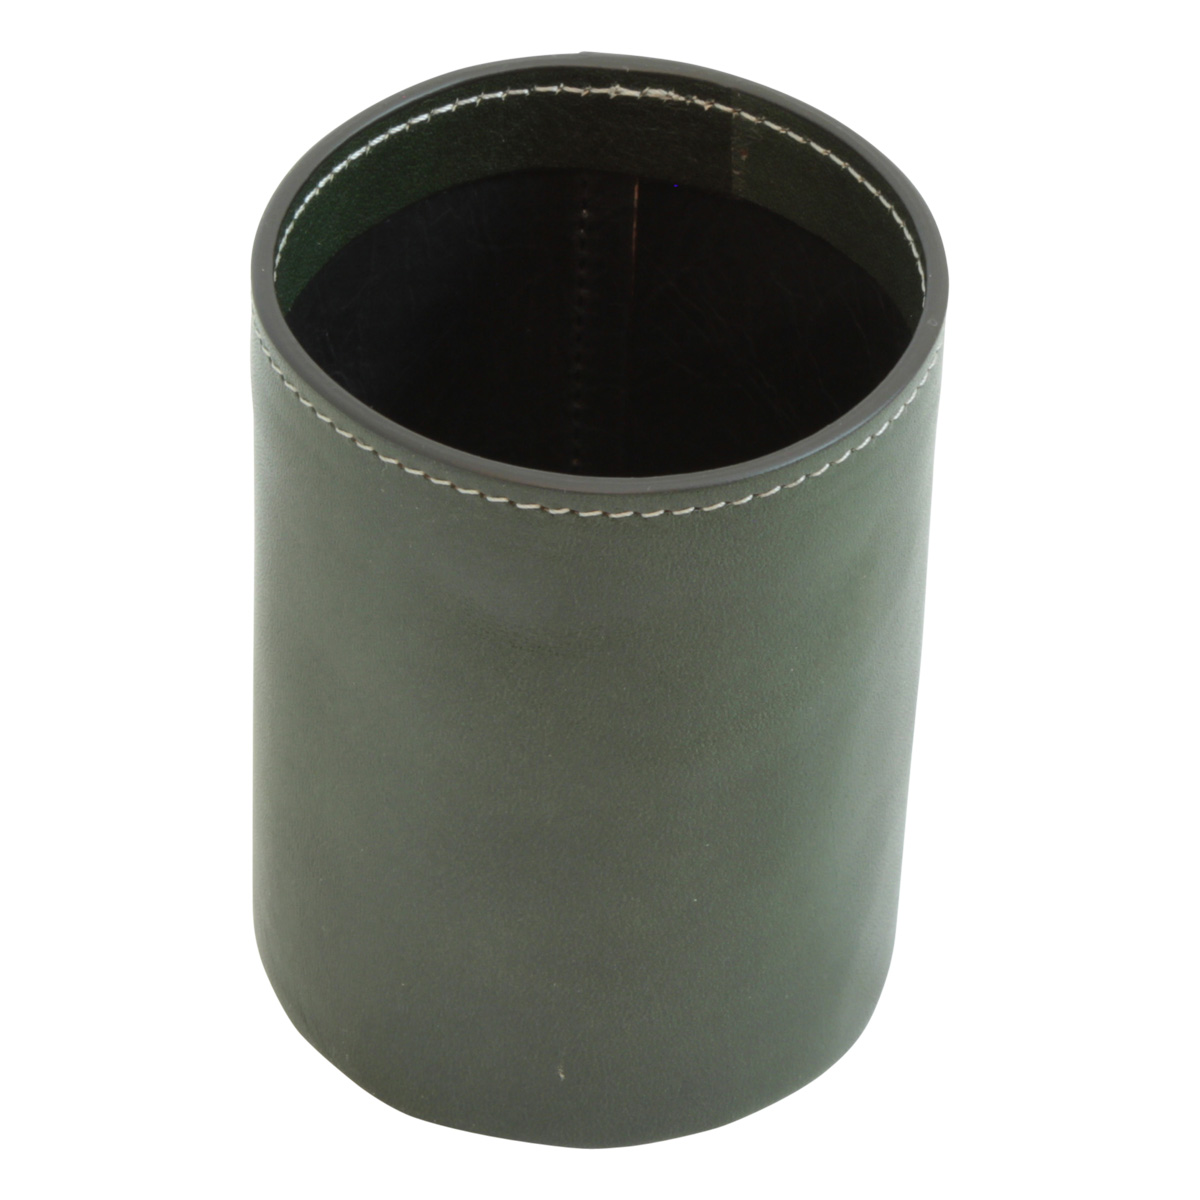 Leather pen cup - green|763089VE|Old Angler Firenze